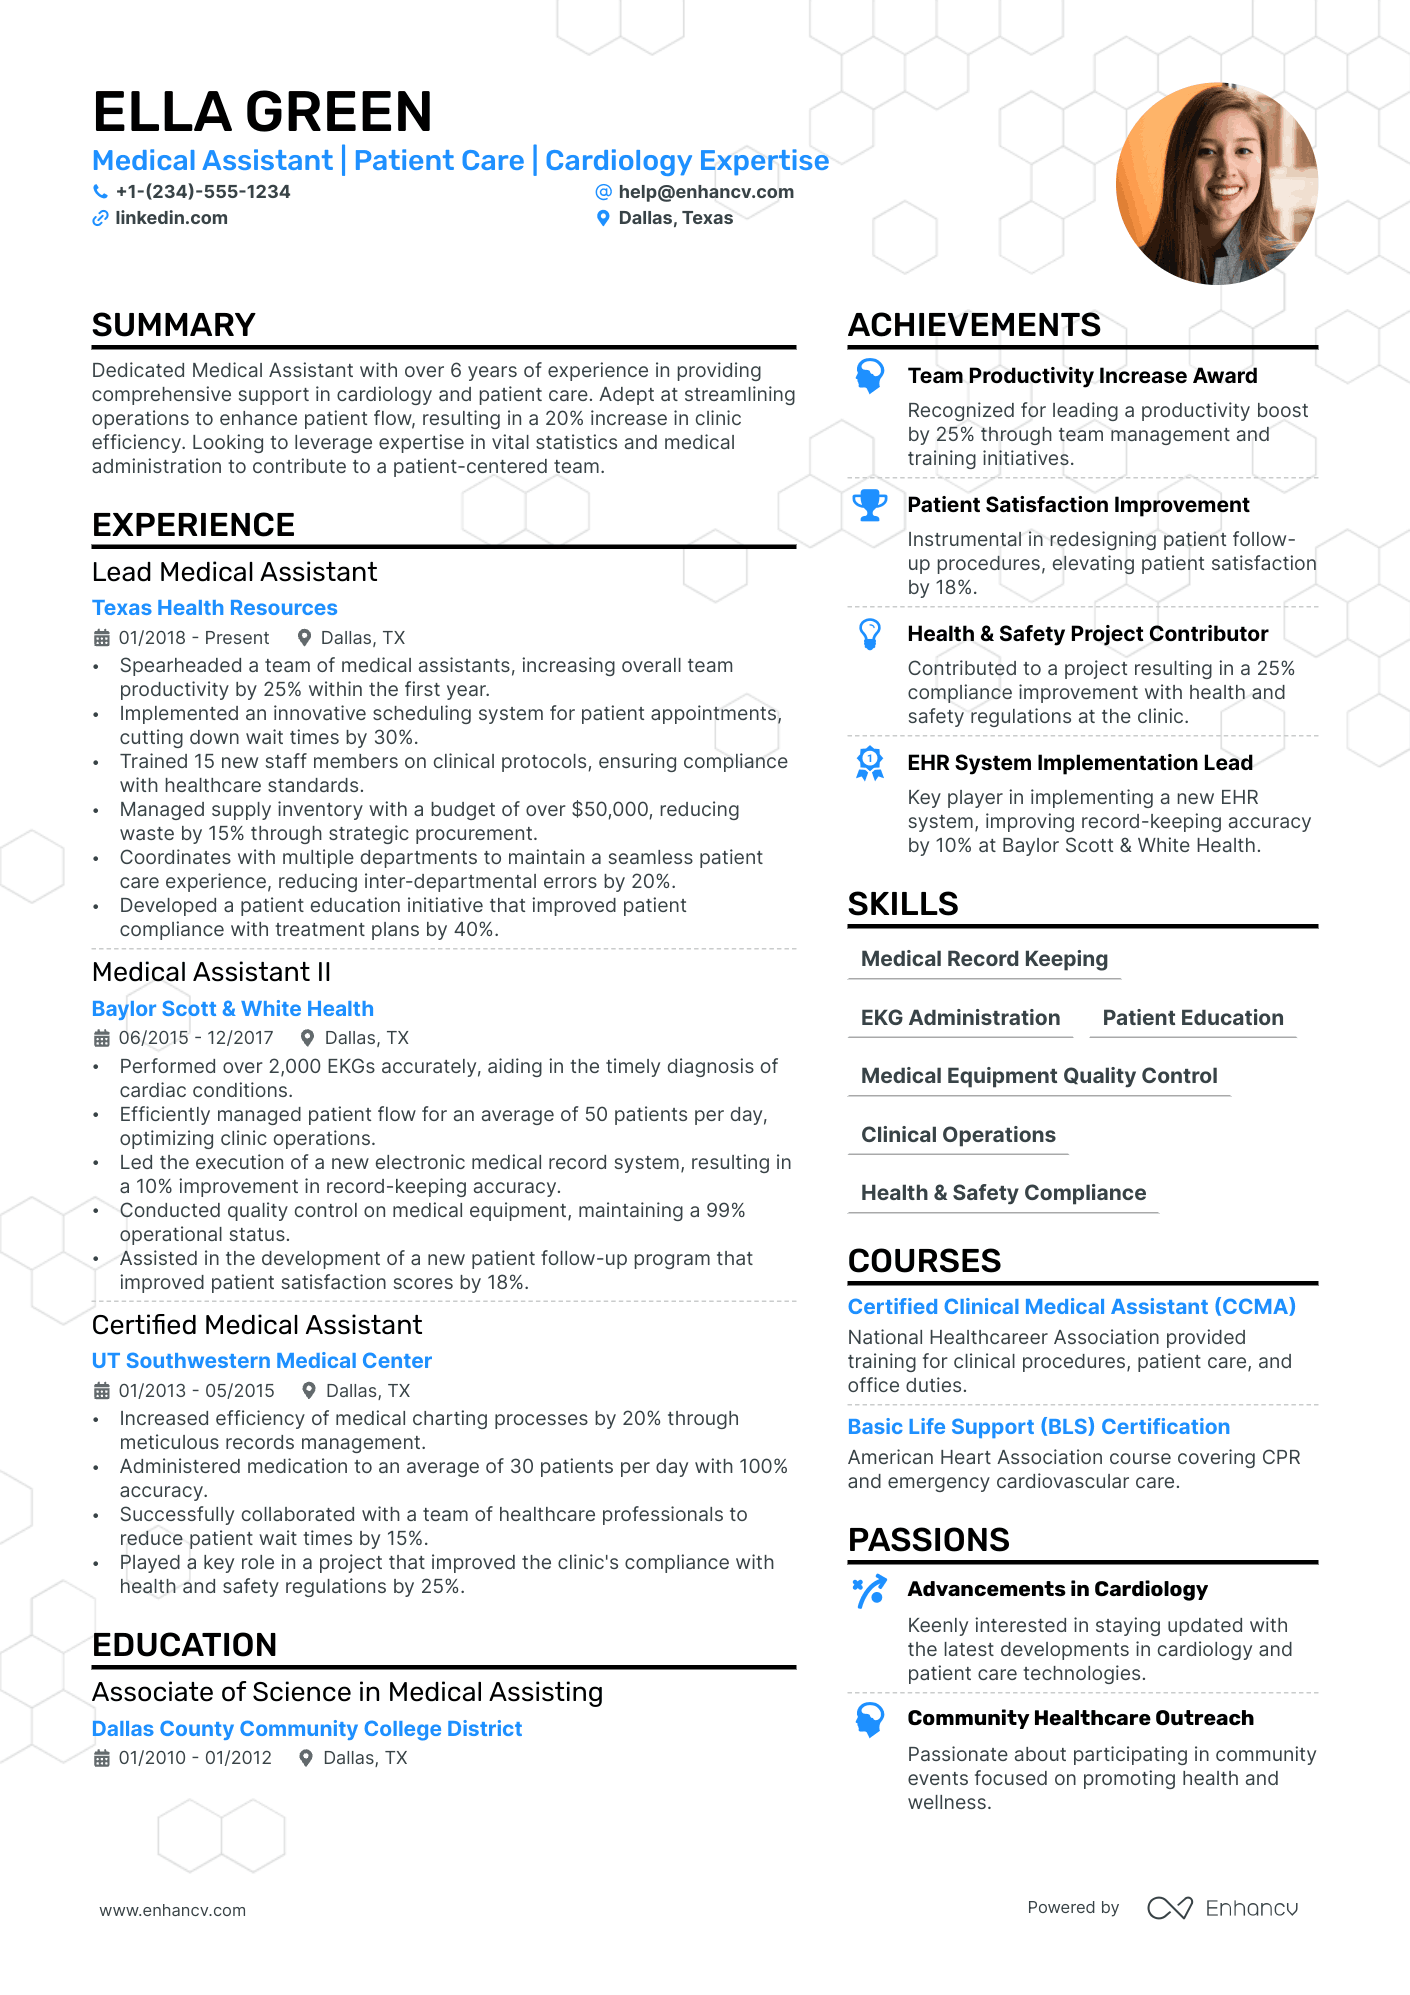 Cardiology Medical Assistant resume example